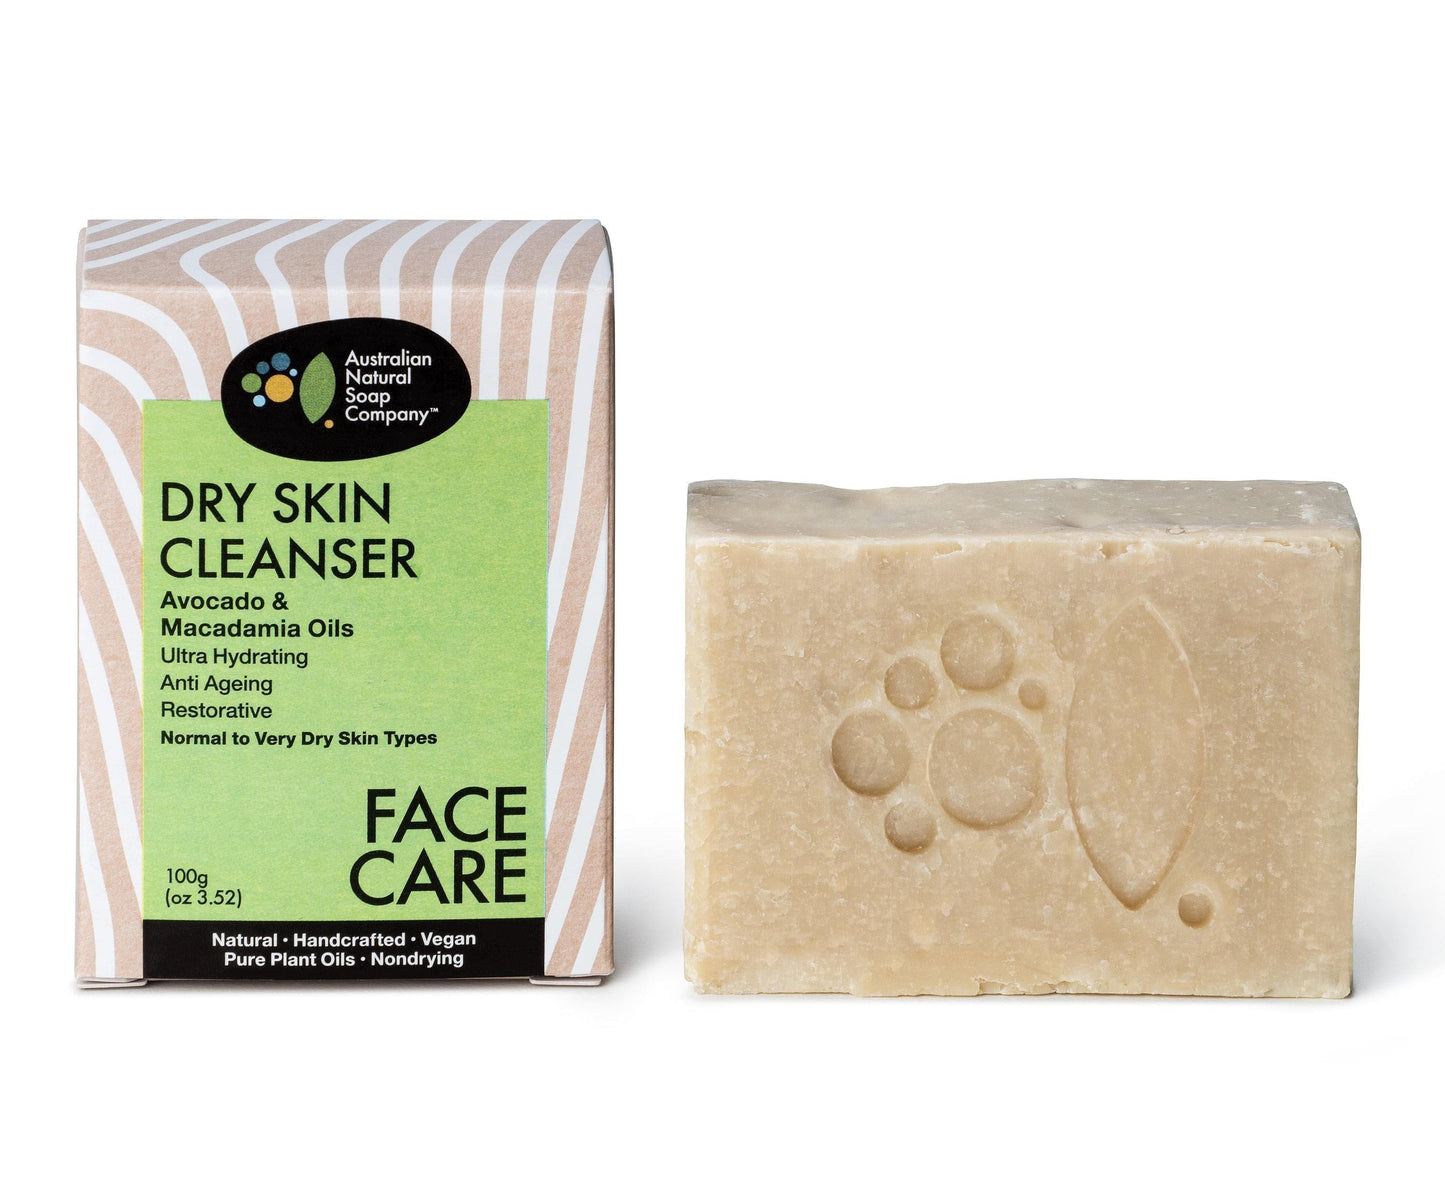 The Austalian Natural Soap Soap Company - Dry Skin Facial Cleanser 100g